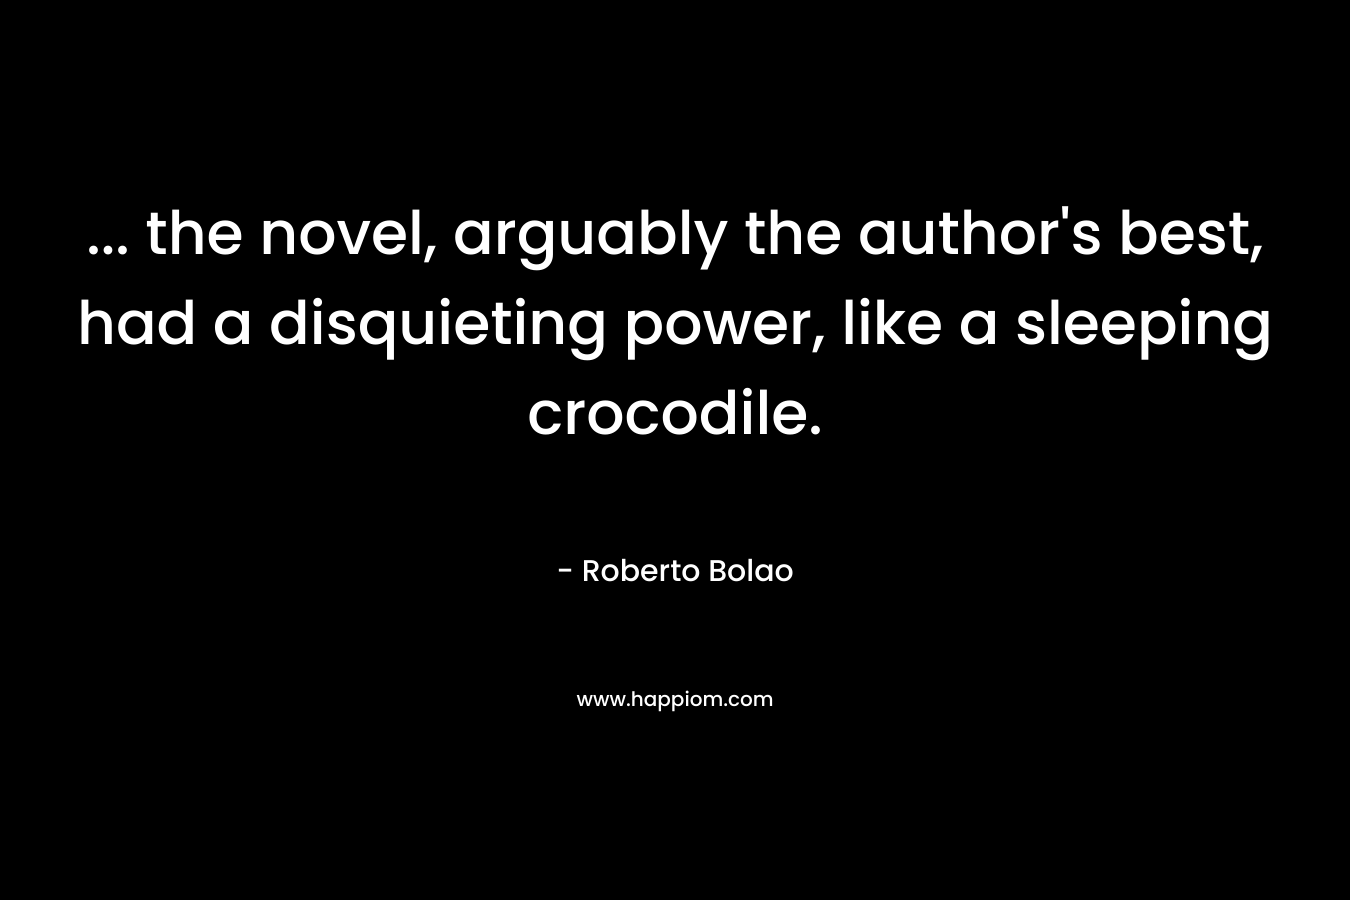 ... the novel, arguably the author's best, had a disquieting power, like a sleeping crocodile.